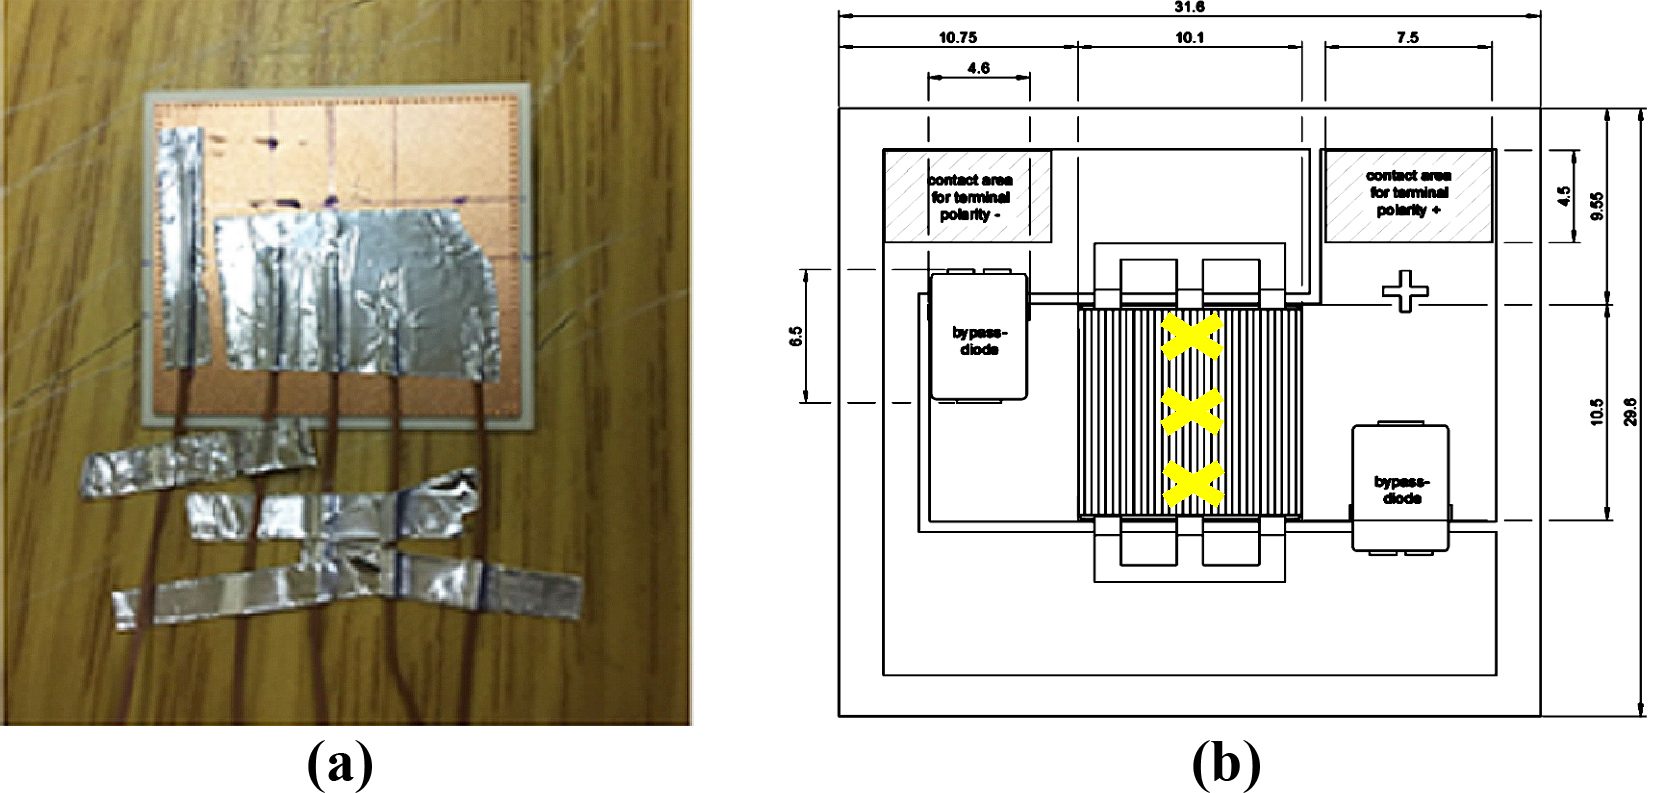 (a) Thermocouples attached at the back of the solar cell assembly and (b) their locations (letter X).